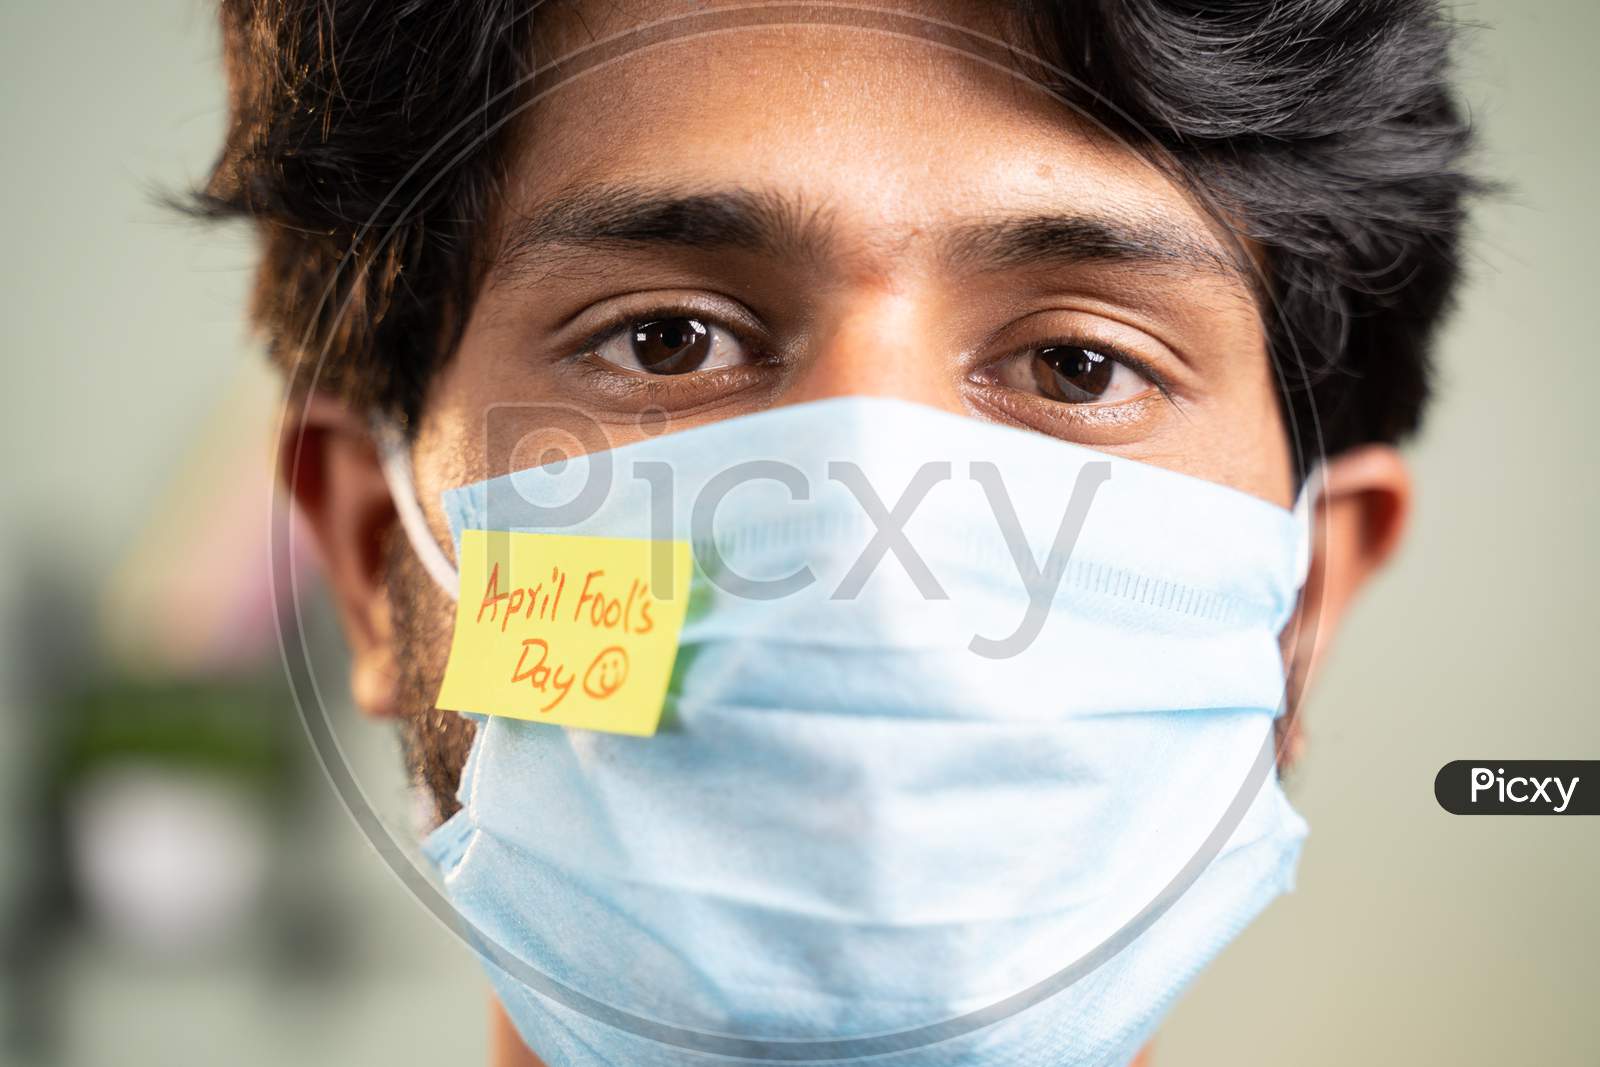 Young Man With Medical Face Mask And April Fools Day Sticker On Mask - Concept Of April Fools Day Celebrations During Coronavirus Covid-19 Pandemic.